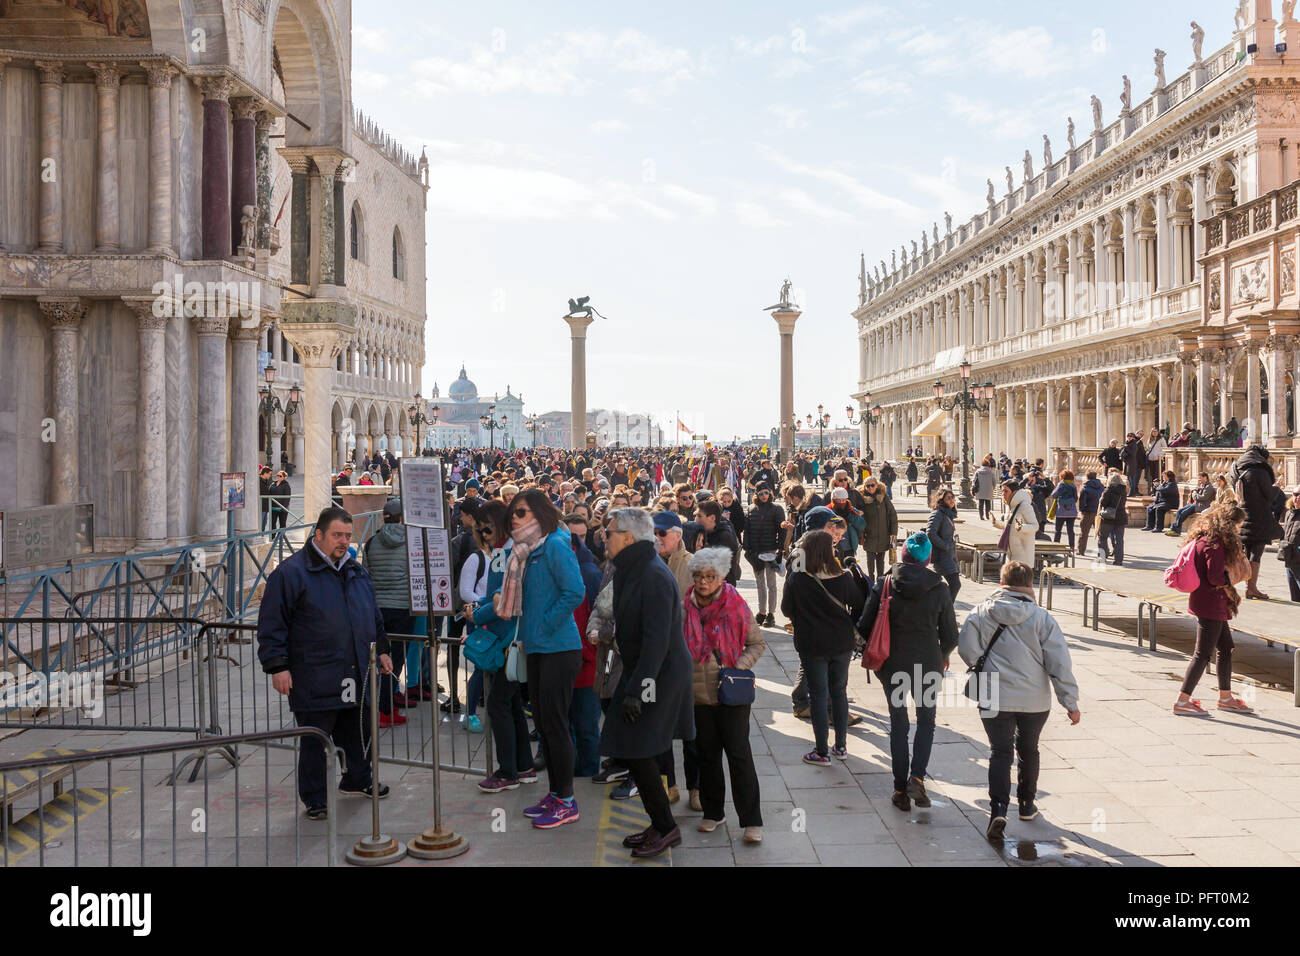 Venice, Italy - March 21, 2018: Tourists crowds at San Marco square in Venice, Italy Stock Photo